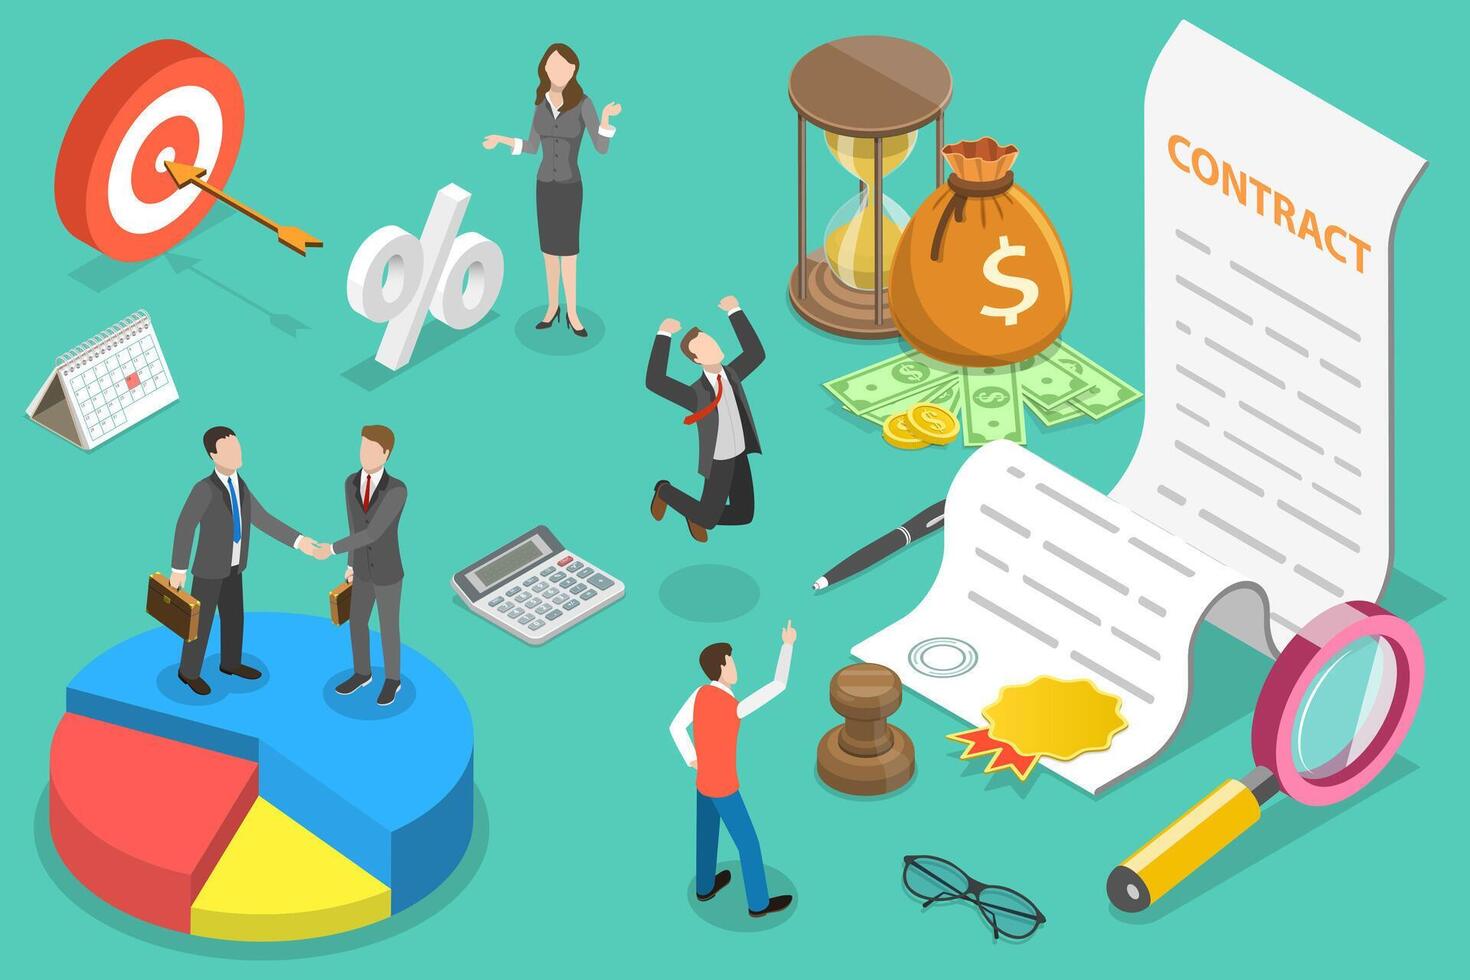 3D Isometric Flat Vector Conceptual Illustration of Signing Contract.